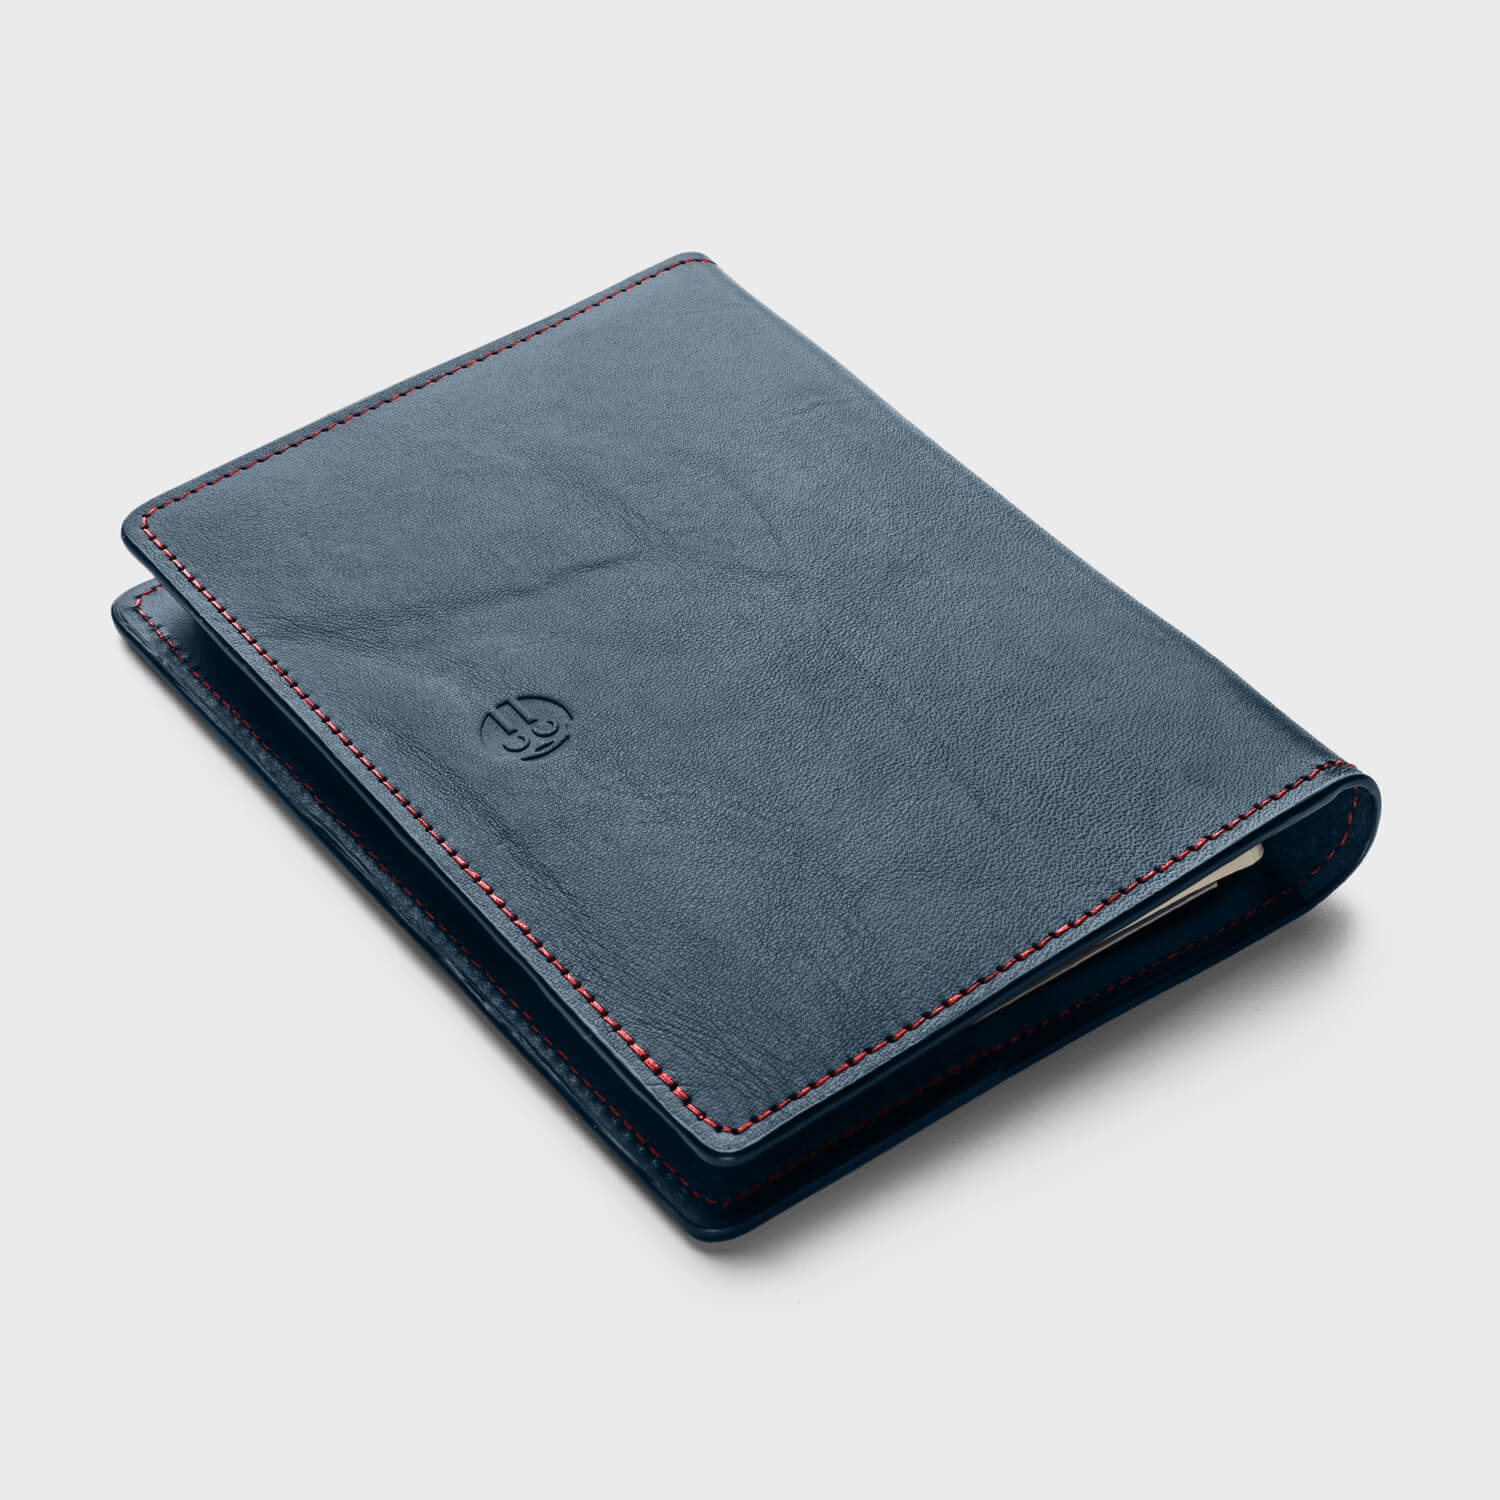 Leather Notebook - Oracle Red Bull Racing - Blue